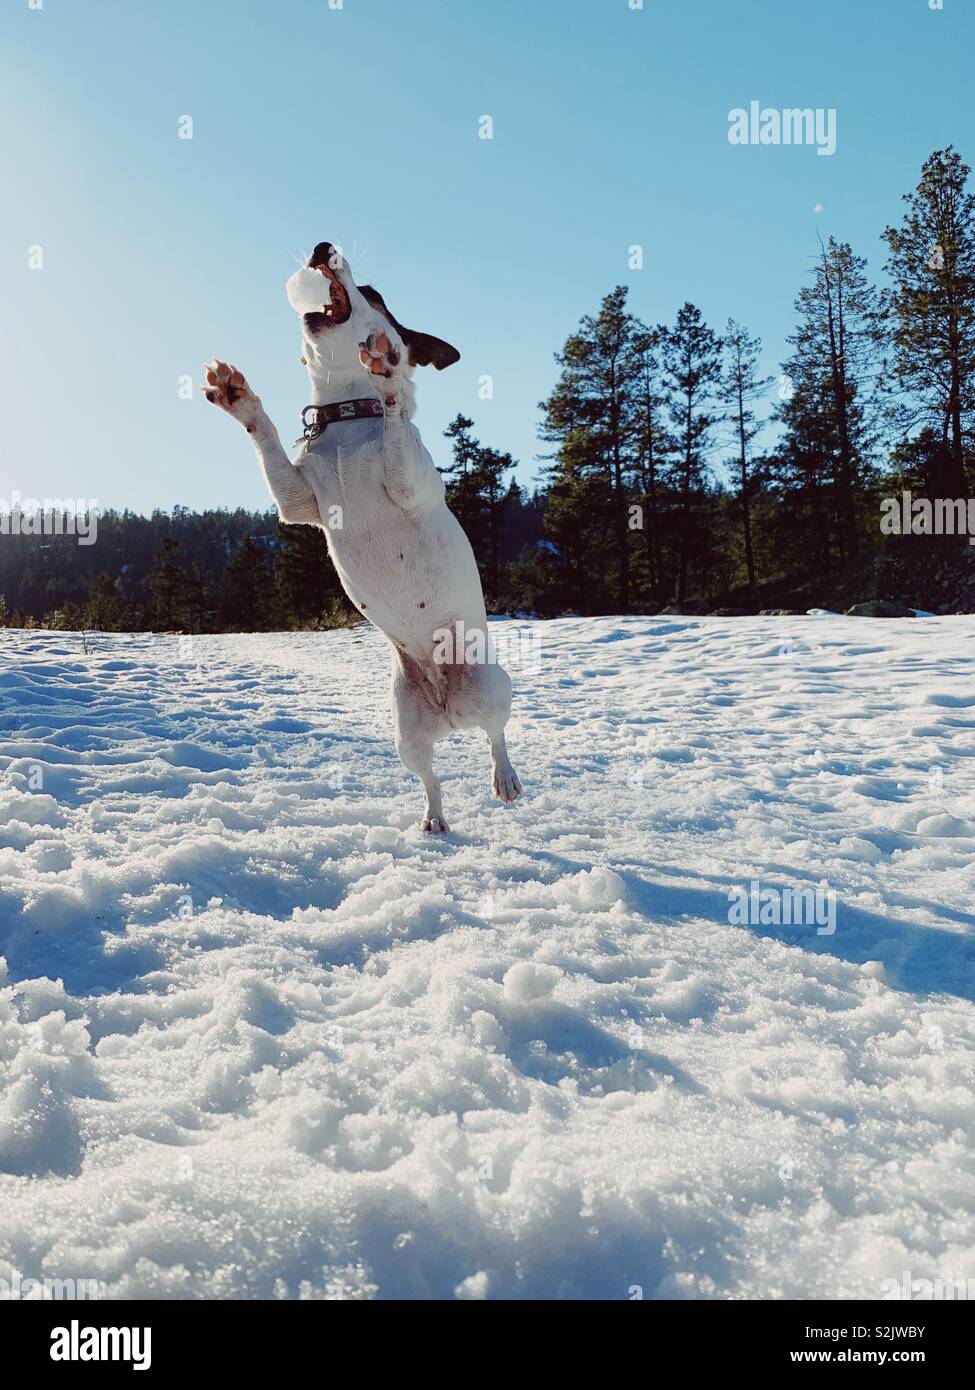 Low angle view of a dog jumping up catching a snowball in her mouth on a snowy late winter day with forest background Stock Photo